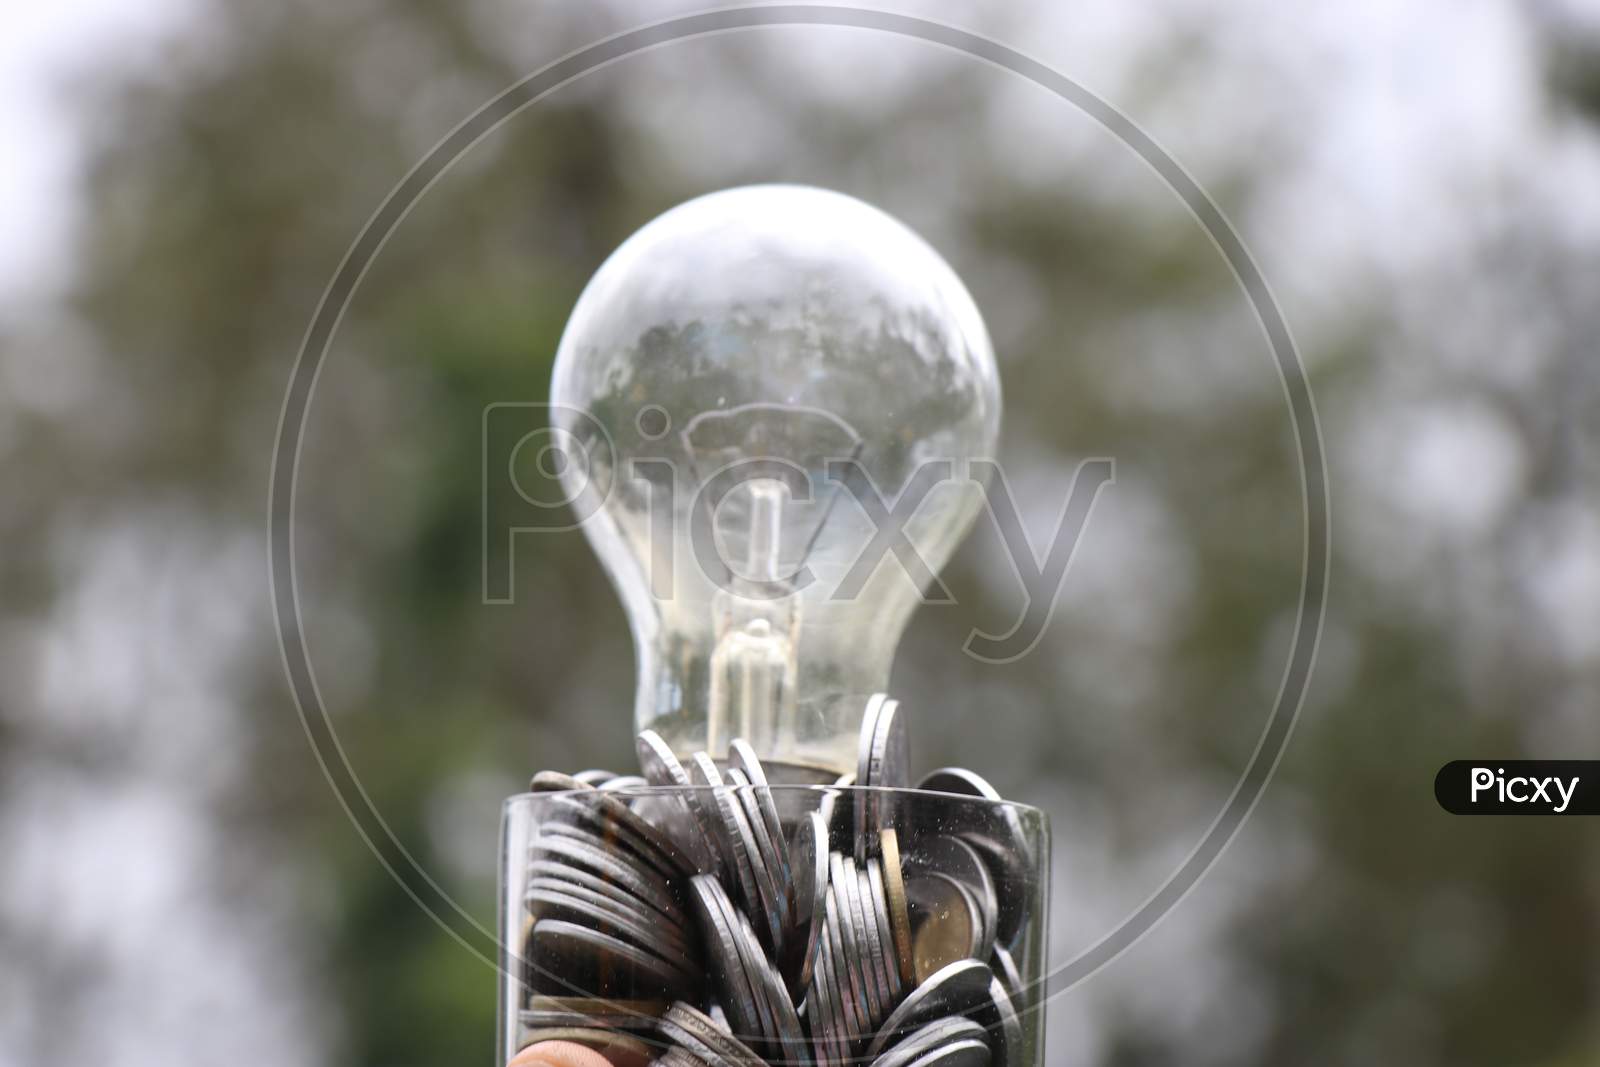 Pennies With Glass Bulb On Its Top Showing Ideas And Innovation Concept Or Growing Business With Money Ideas Concept